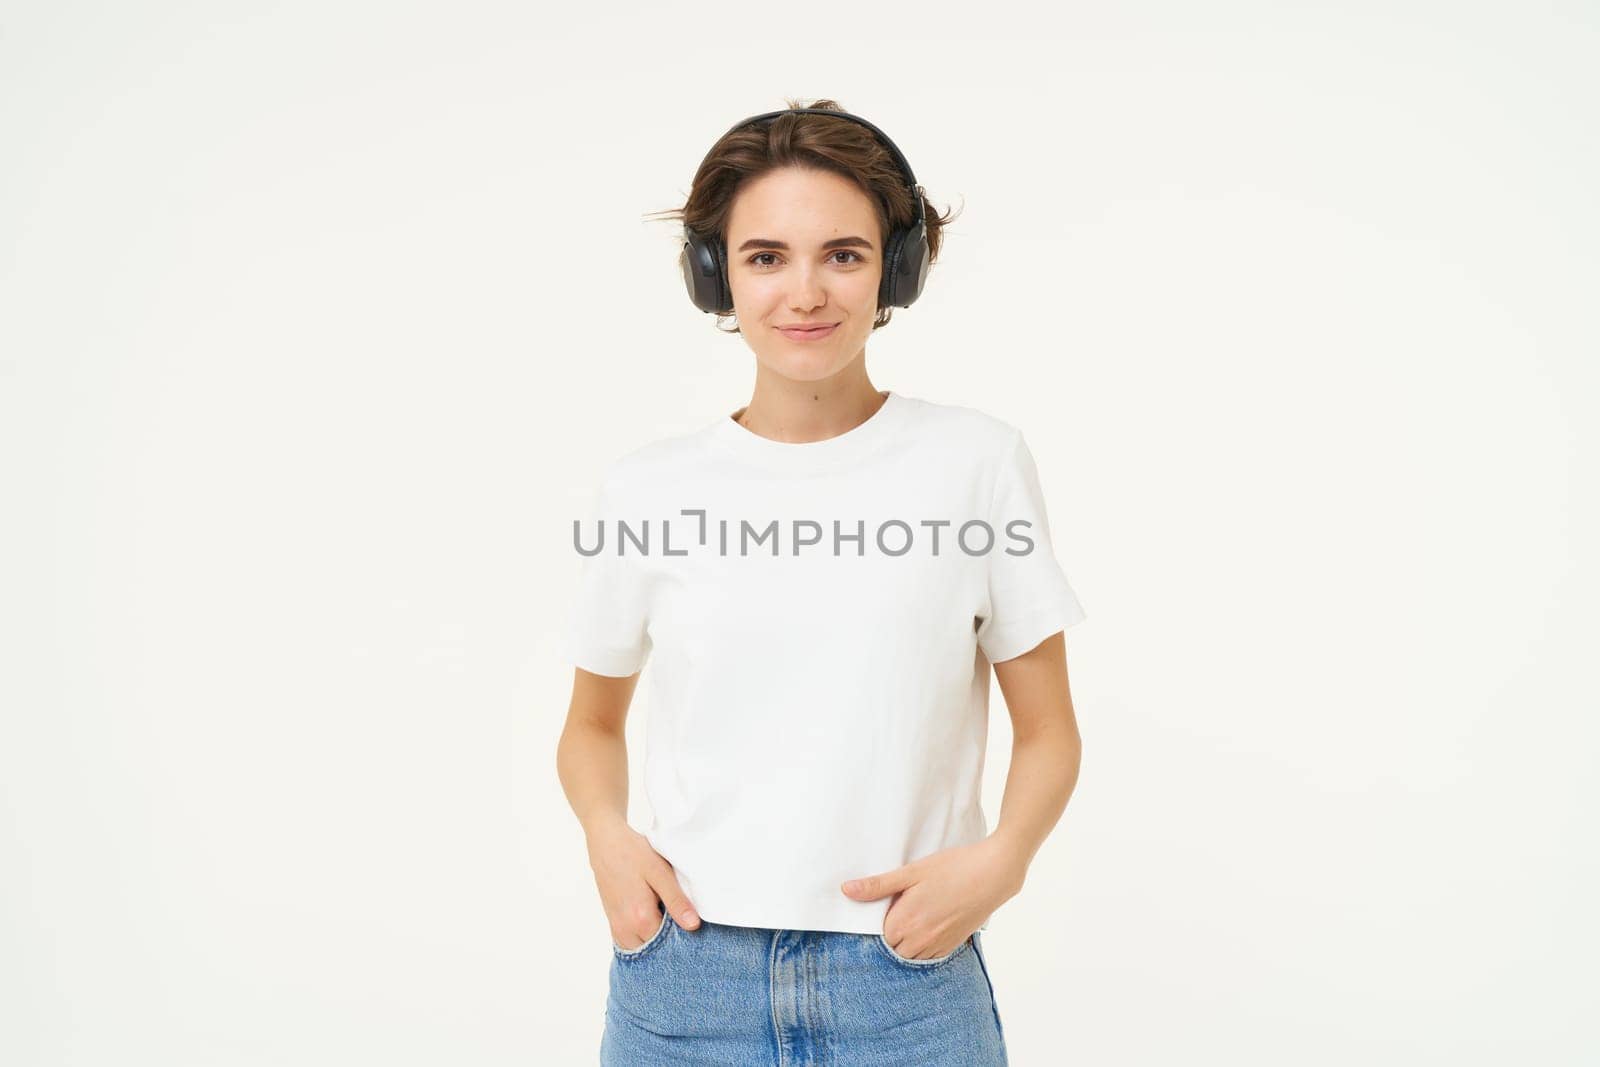 Portrait of young female model, wearing headphones, listens to music, smiling and laughing, standing over white background.